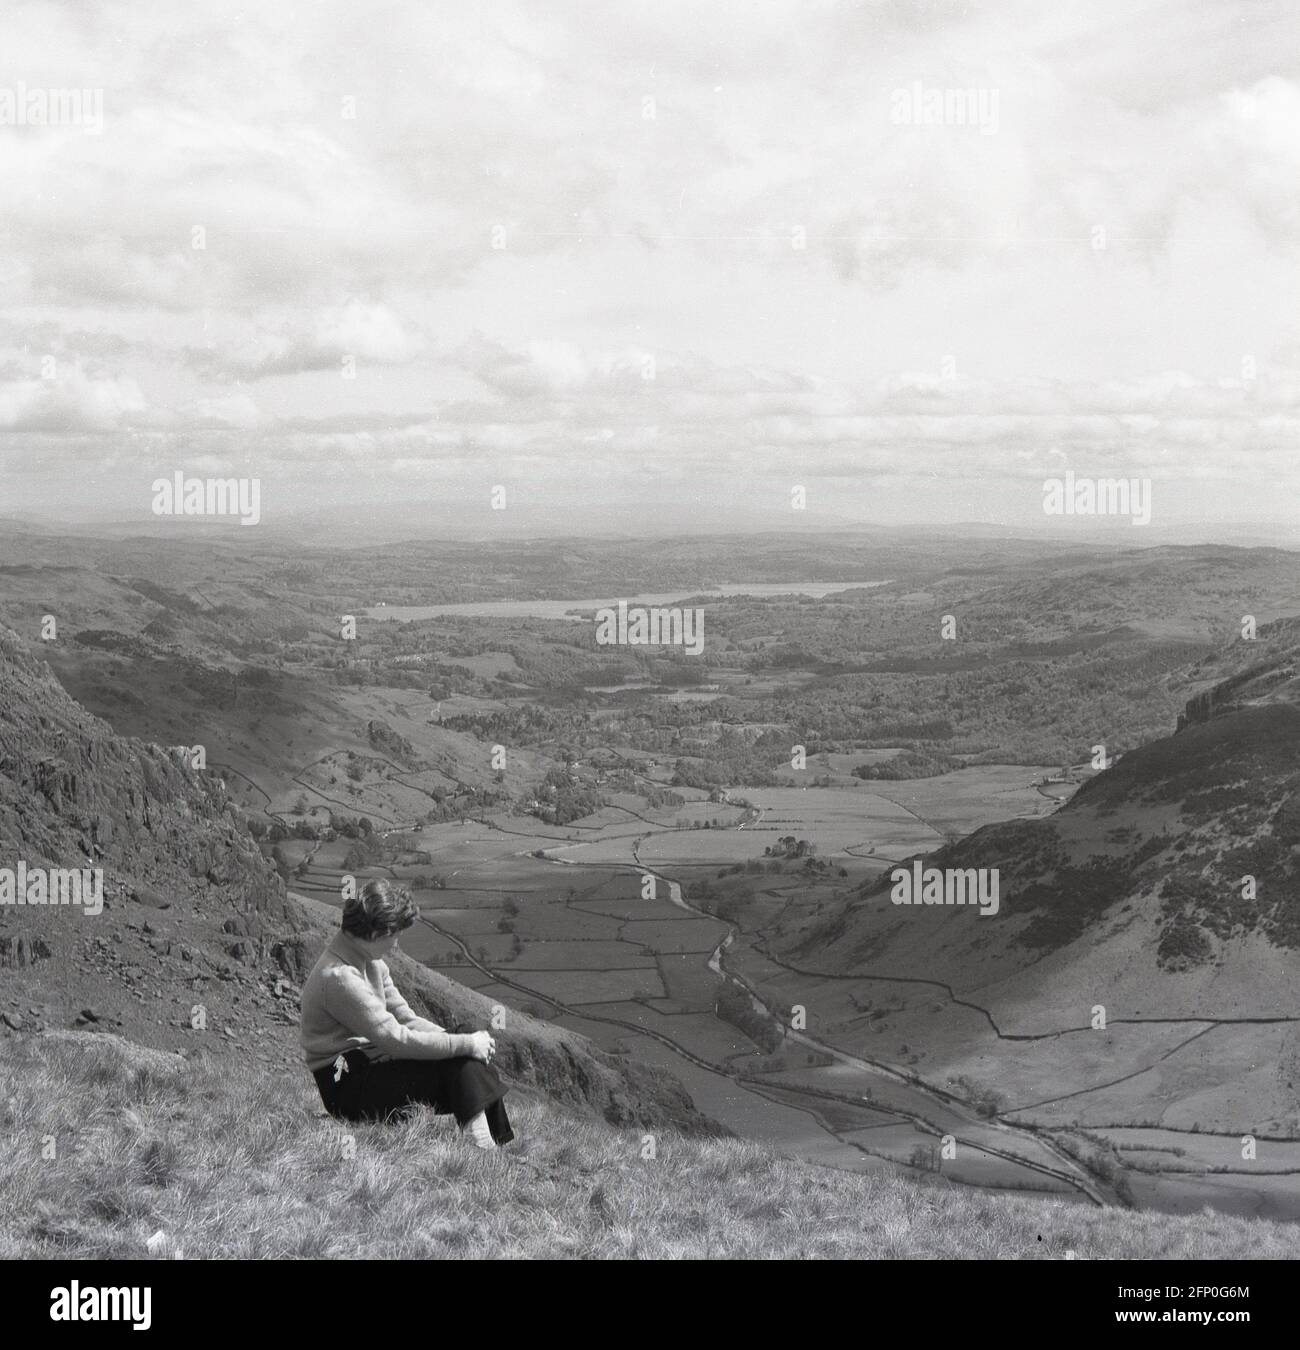 1961, historical picture, its summer time and a lady walker is sitting on a grassy hillside or uplands taking in the glorious view of the valley below and surrounding landscape, Socttsh Highlands, Scotland, UK. Stock Photo